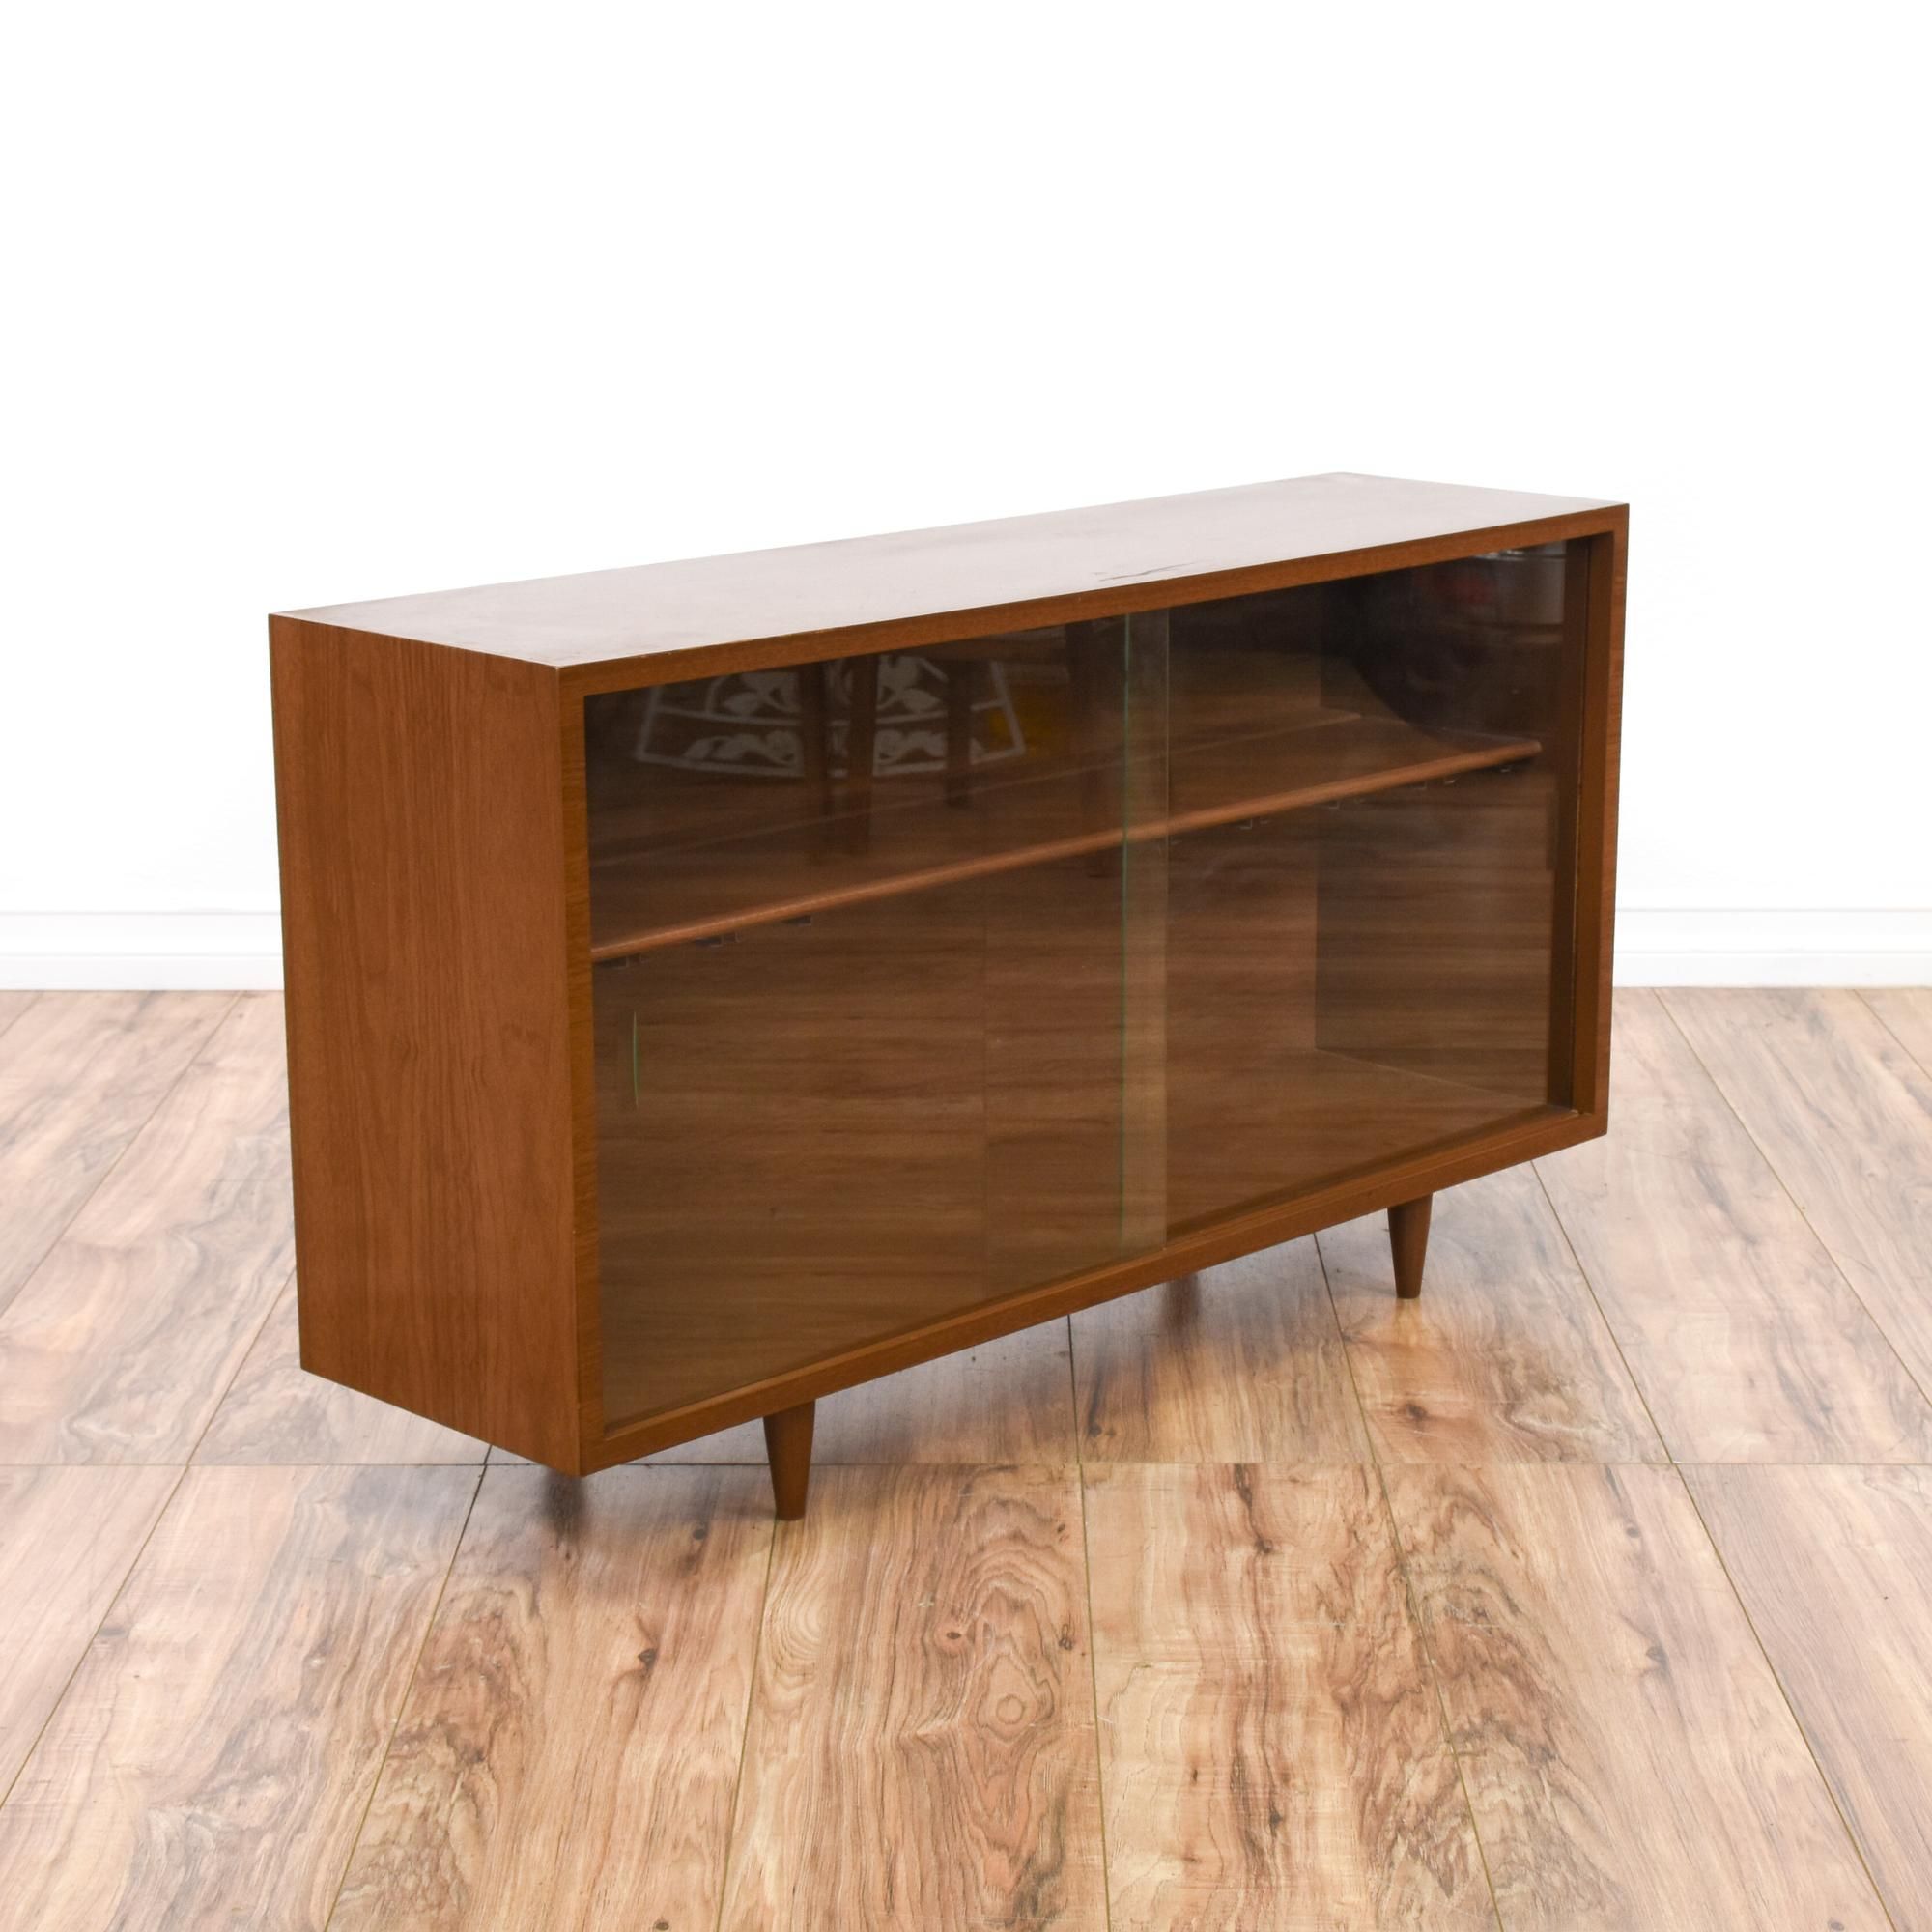 This Low Mid Century Modern Display Case Is Featured In A In Mid Century Retro Modern Oak And Espresso Wood Buffets (View 14 of 30)